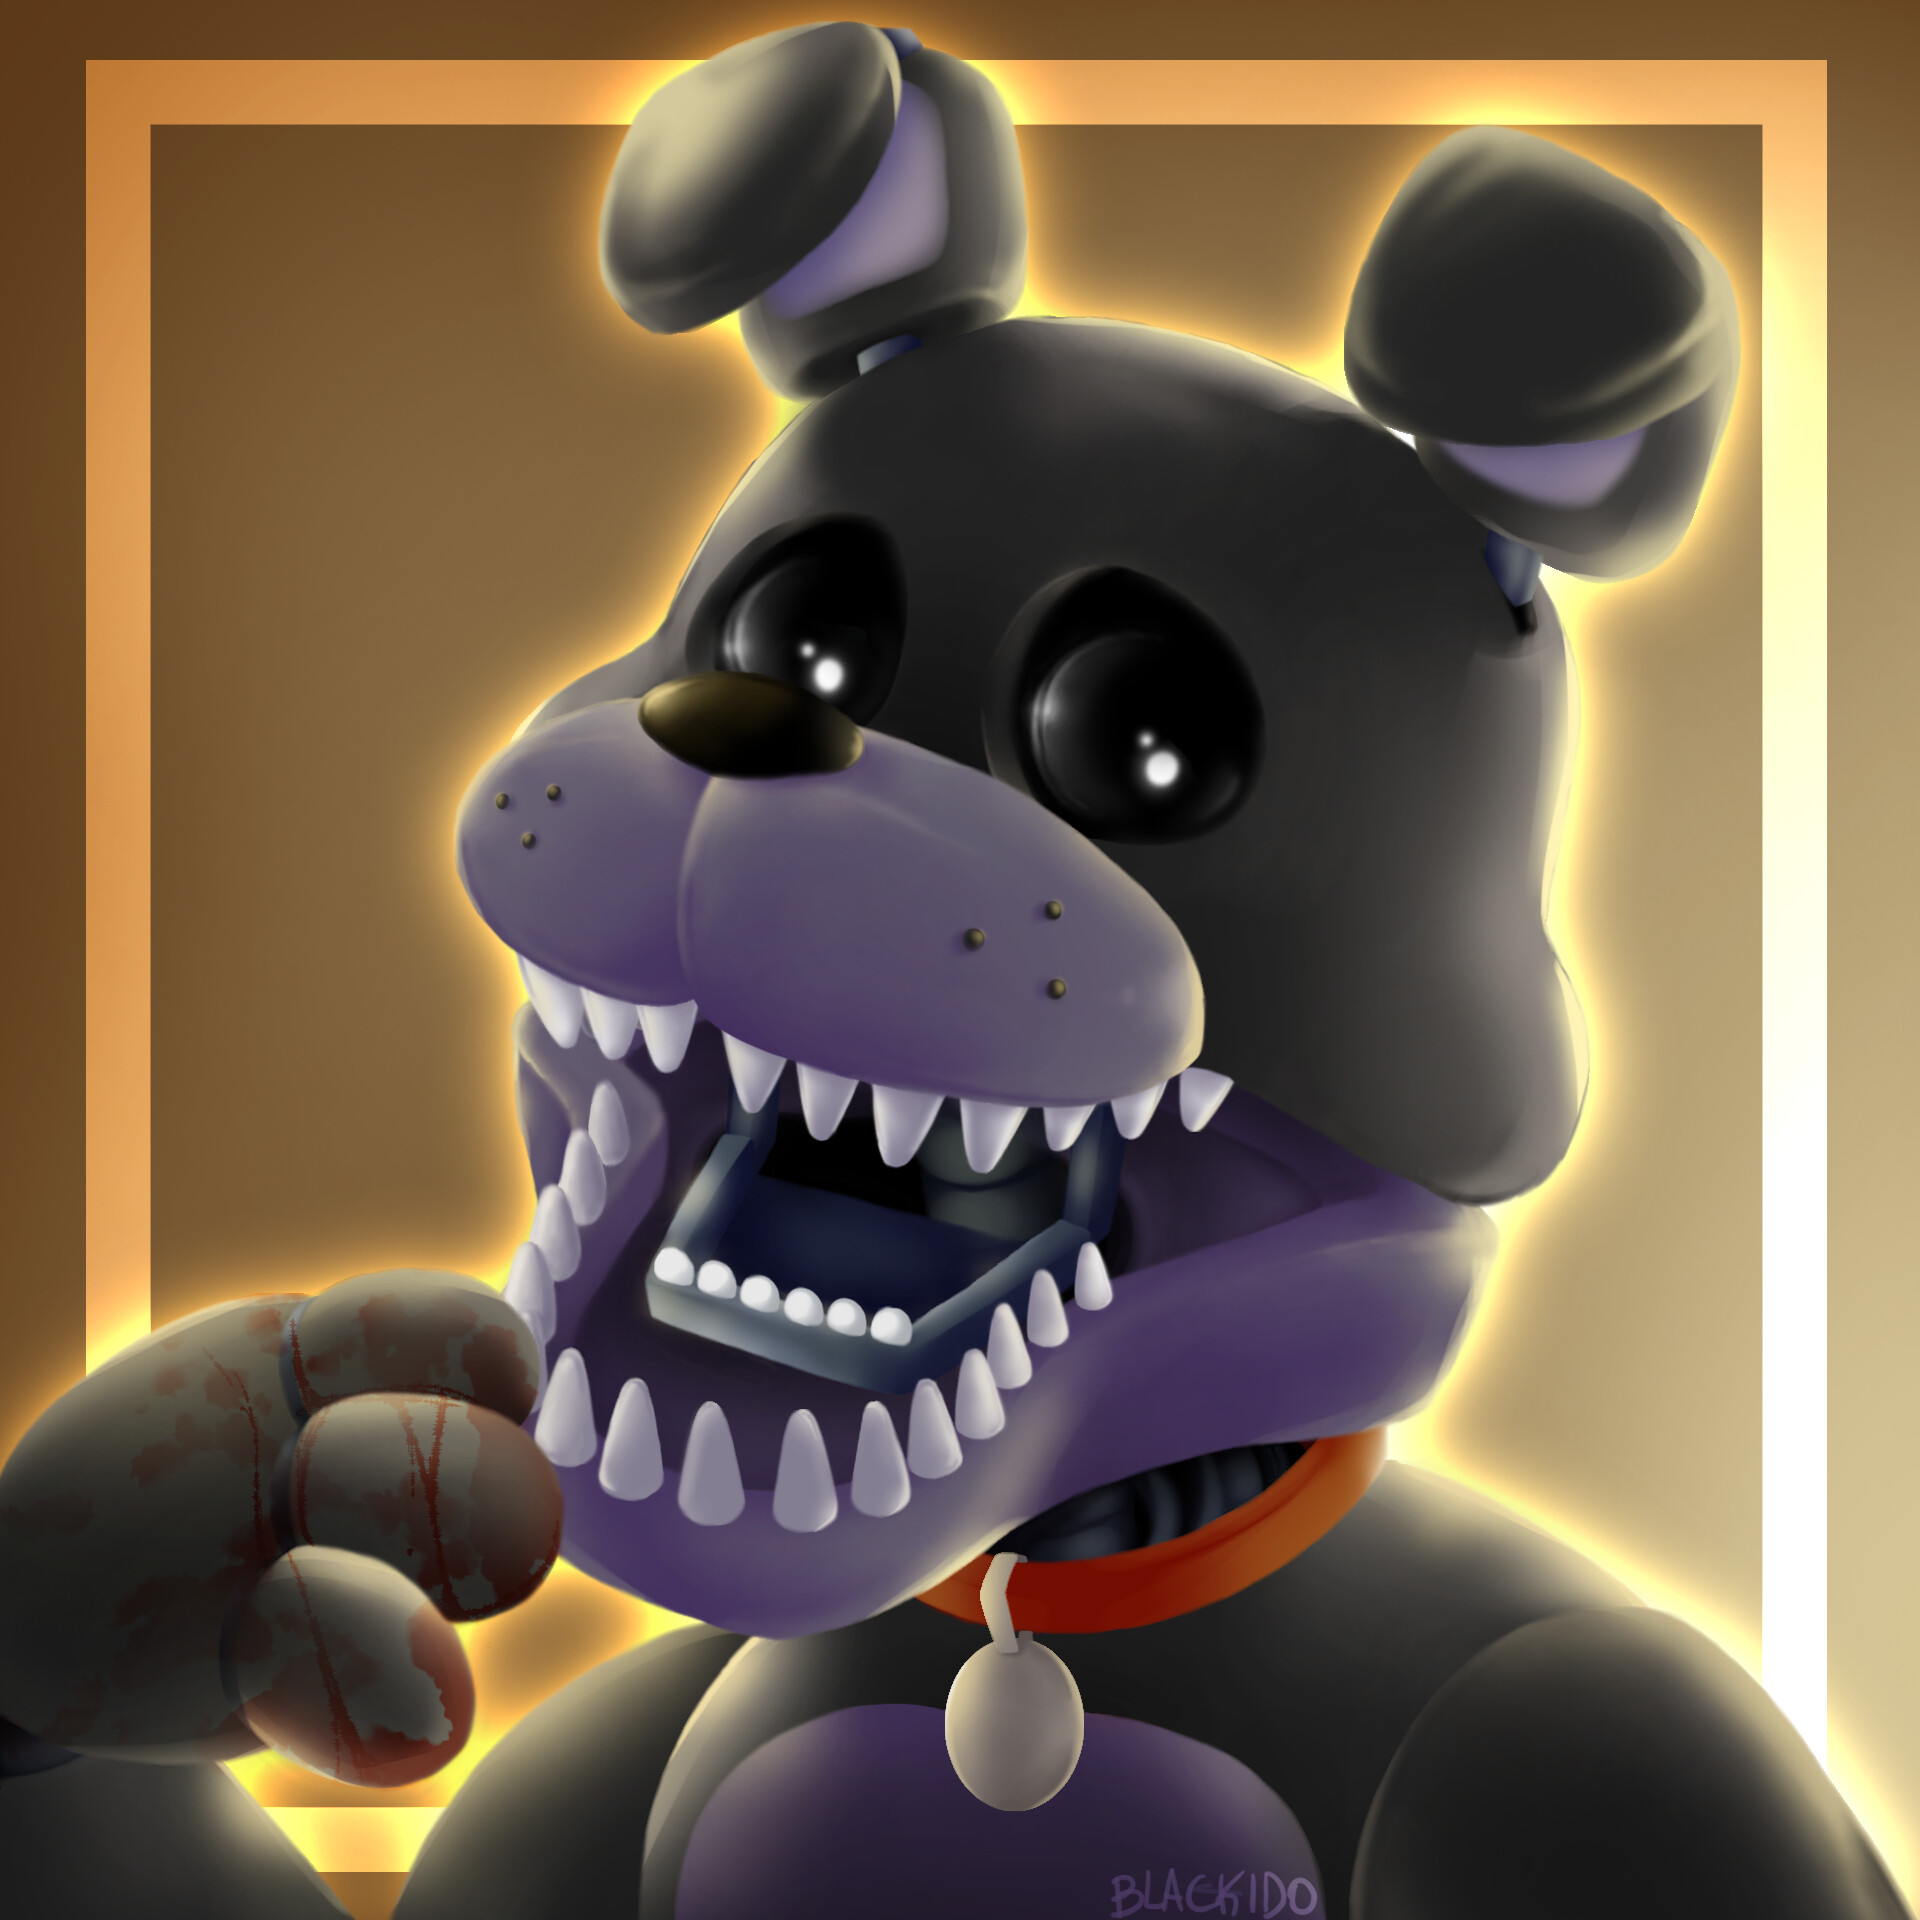 Fanart of the new character of the fnaf novels.